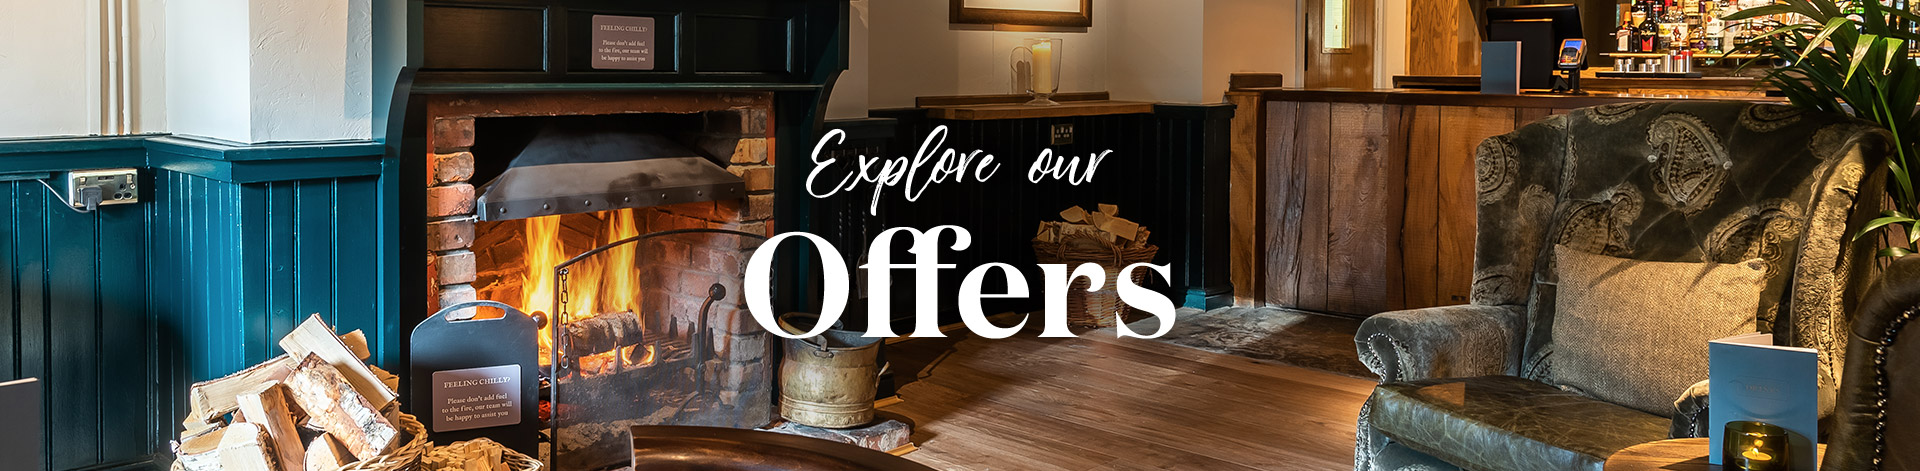 Our latest offers at The Oystercatcher